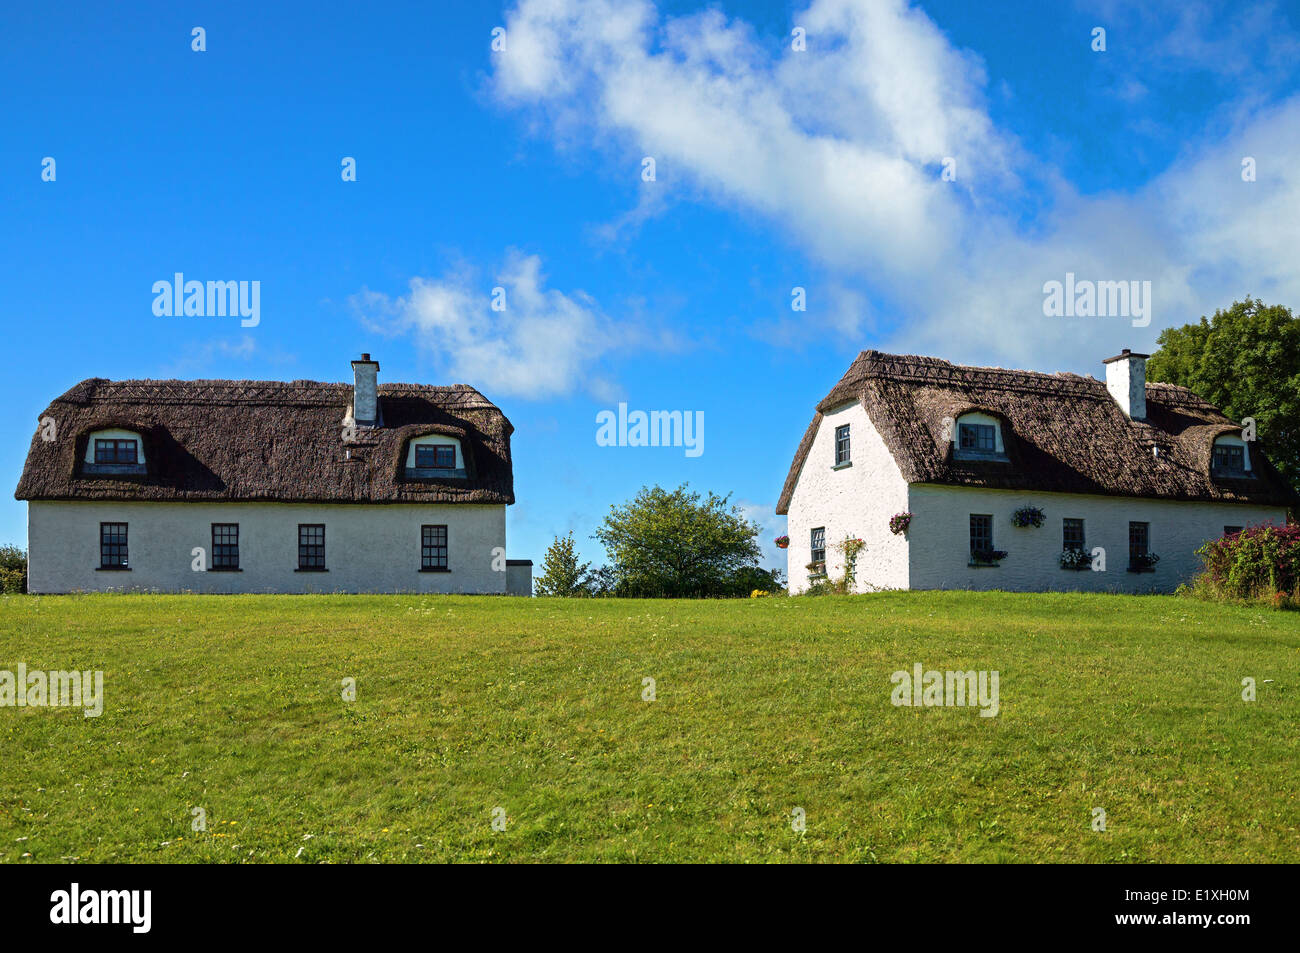 Ireland, Galway country, traditional country houses in the Dunguaire castle area Stock Photo